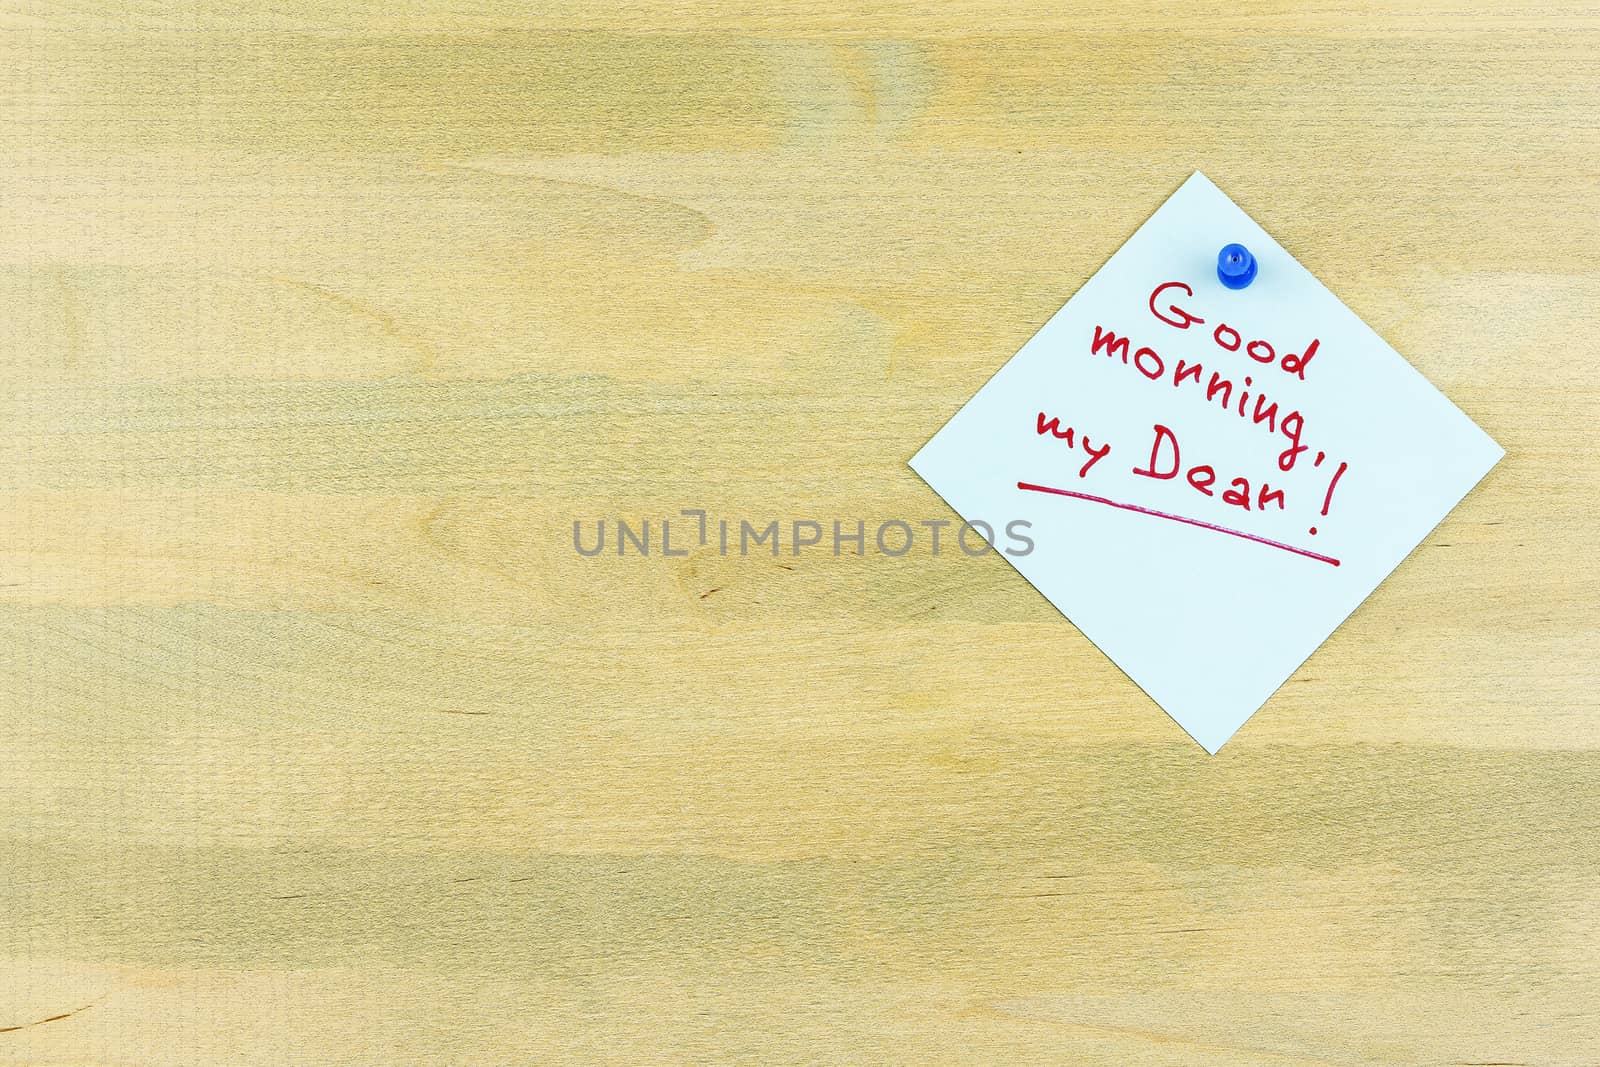 On "Good morning my dear" sheet attached to the wooden surface o by Grommik